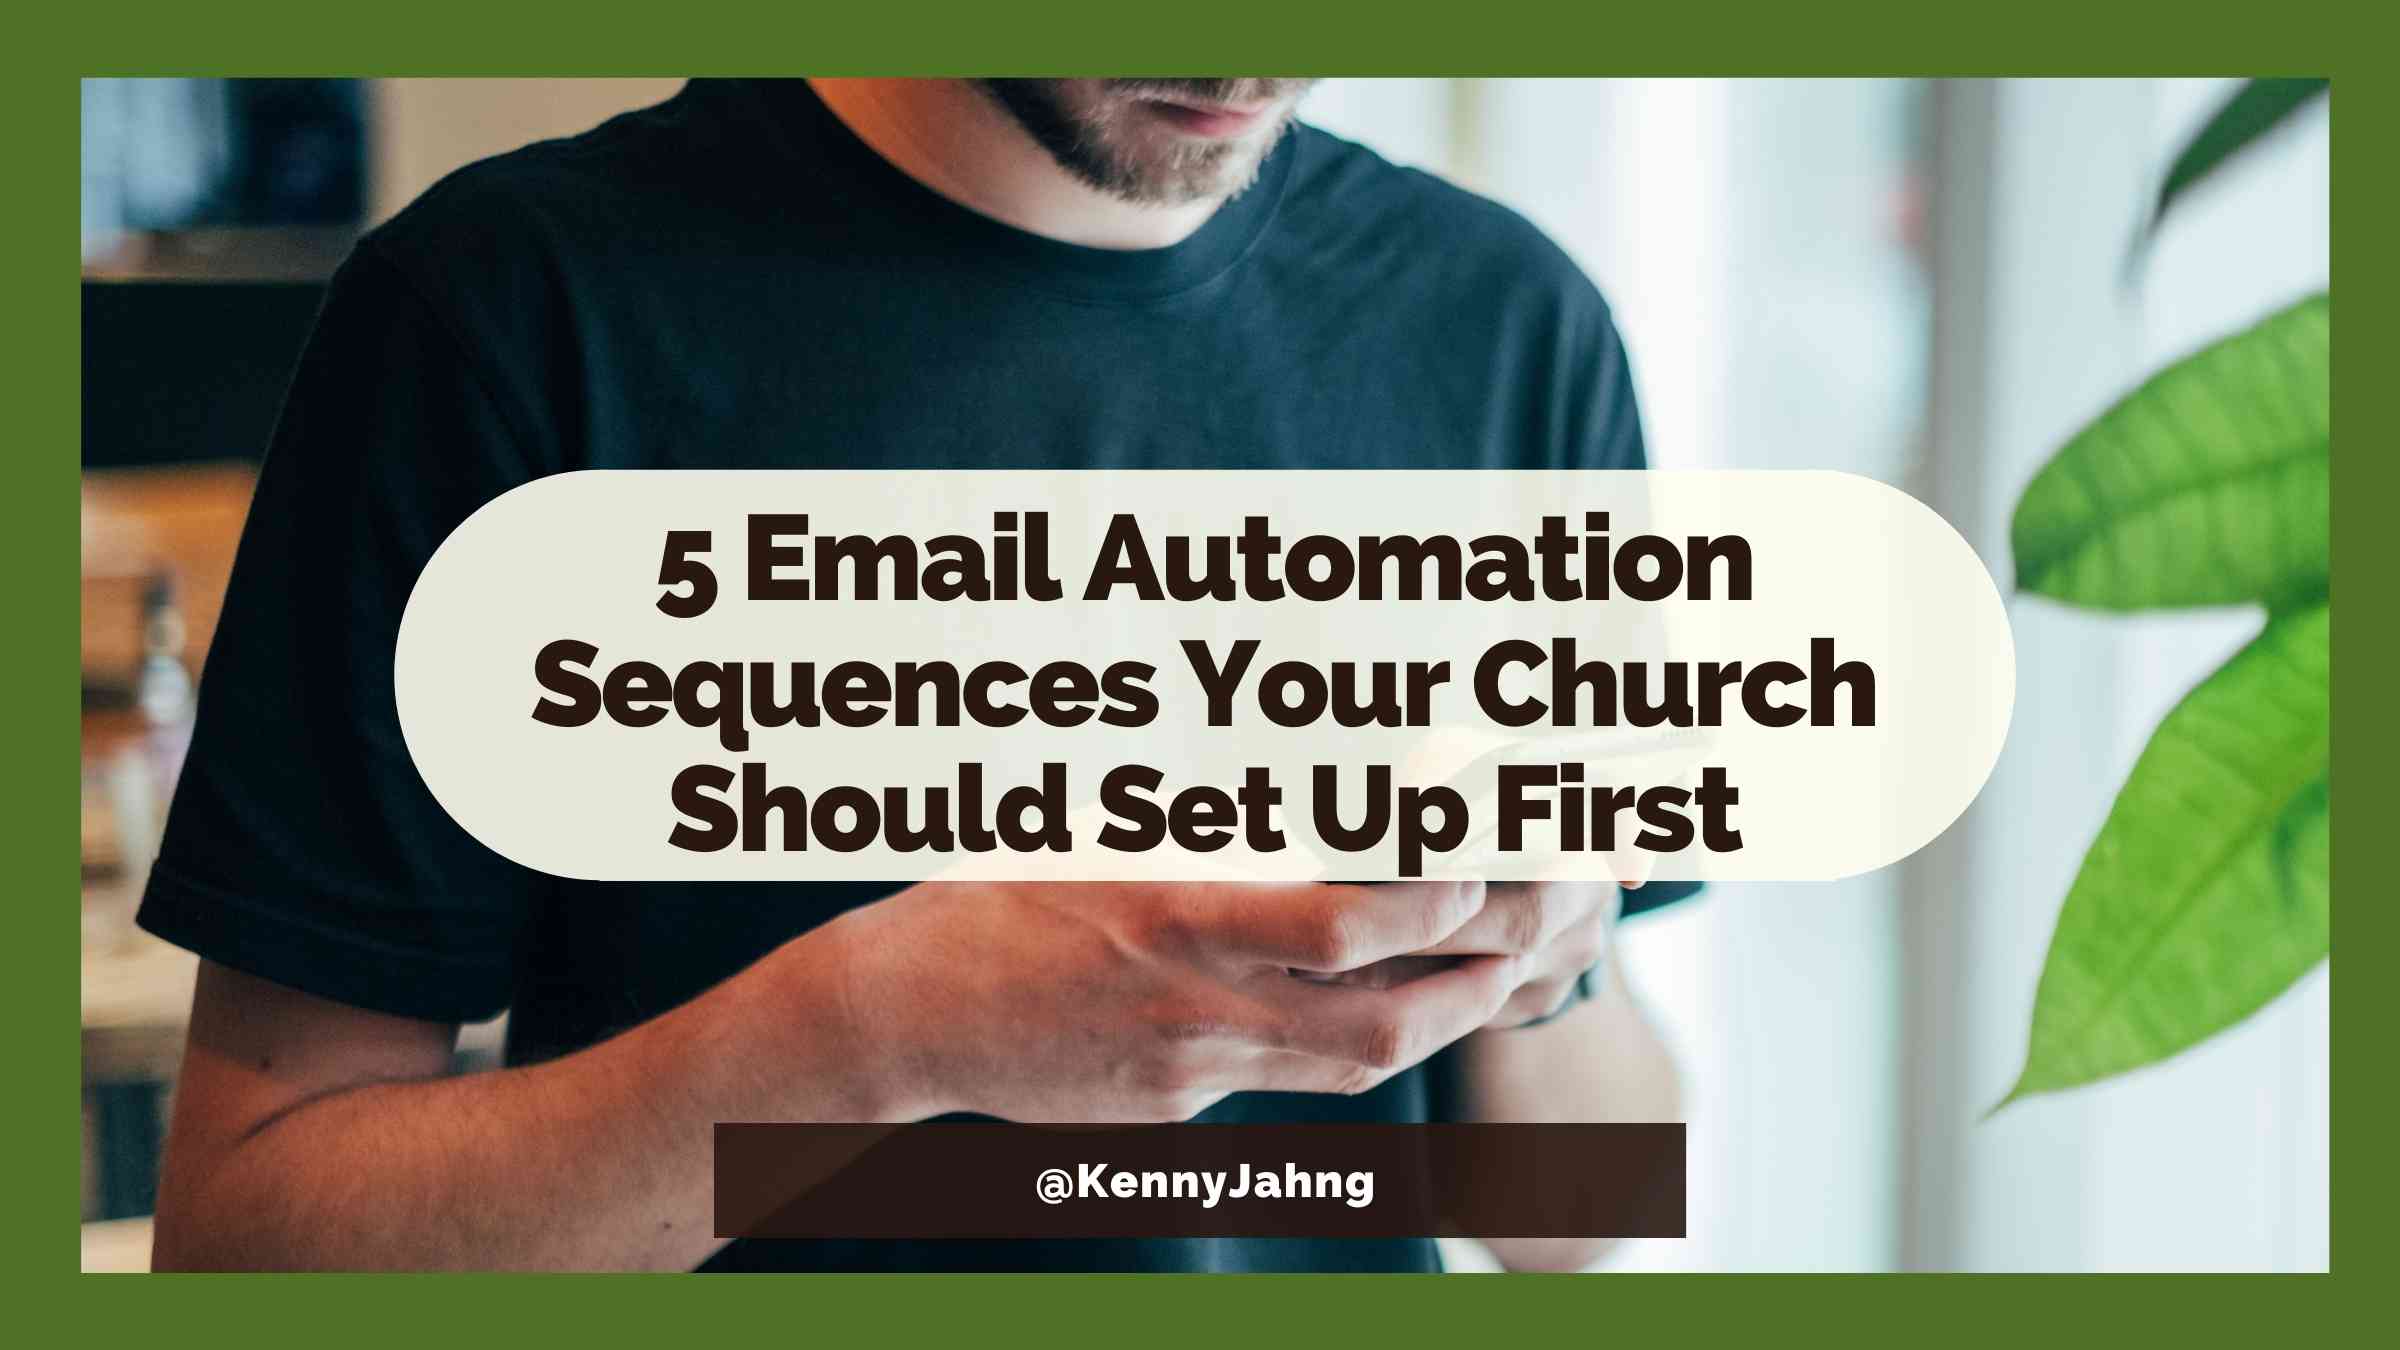 List of 5 email automation sequences churches should use